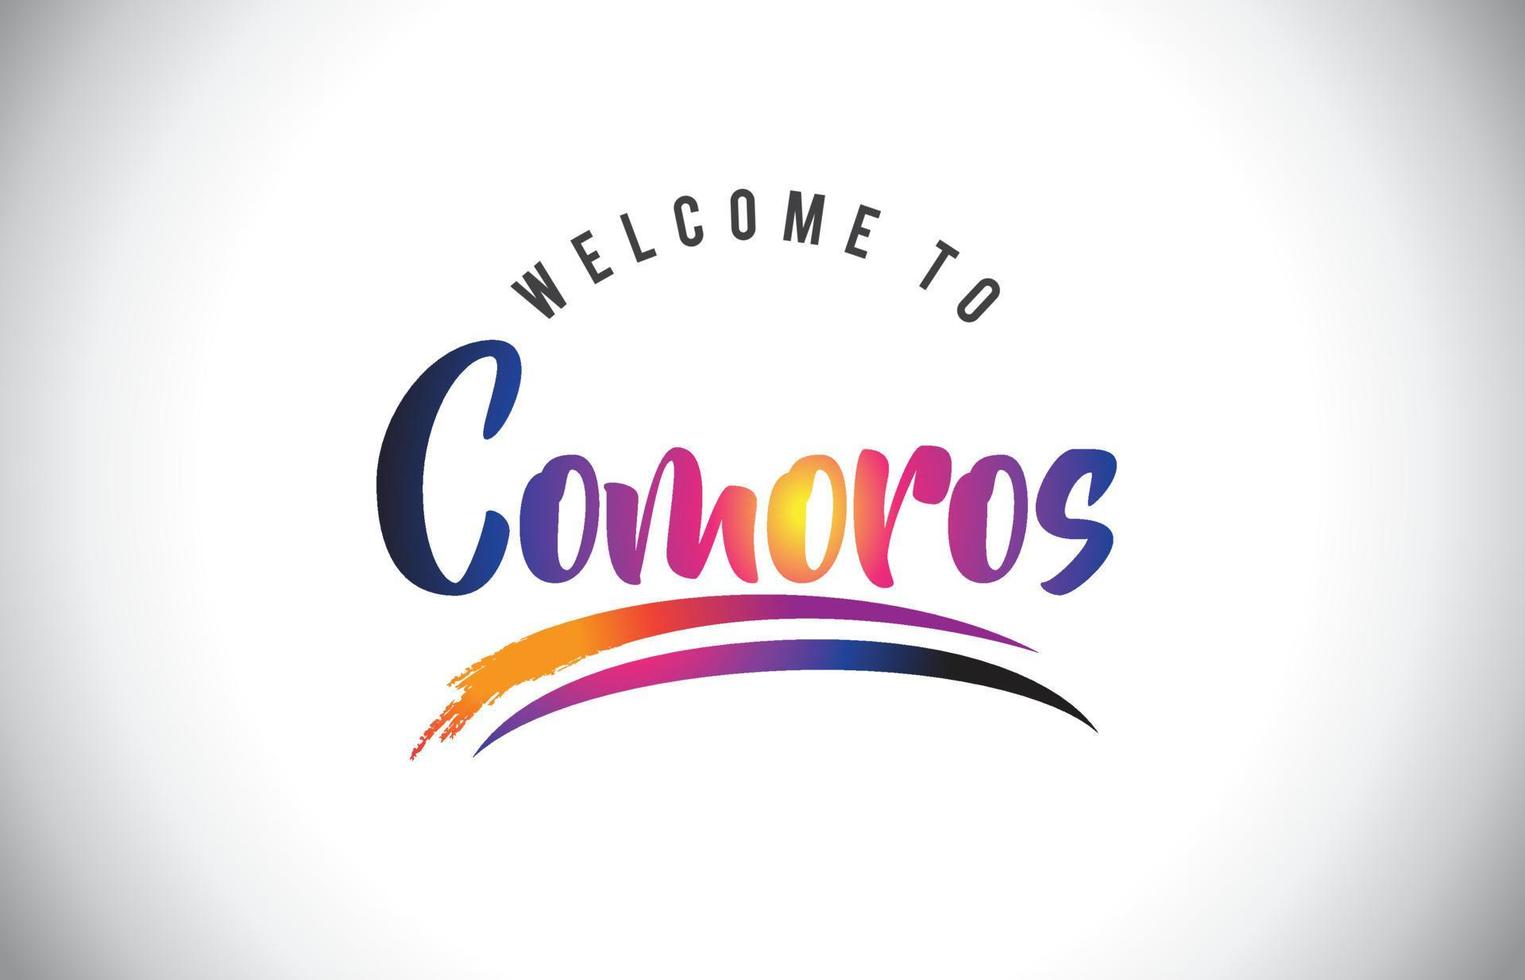 Comoros Welcome To Message in Purple Vibrant Modern Colors. vector